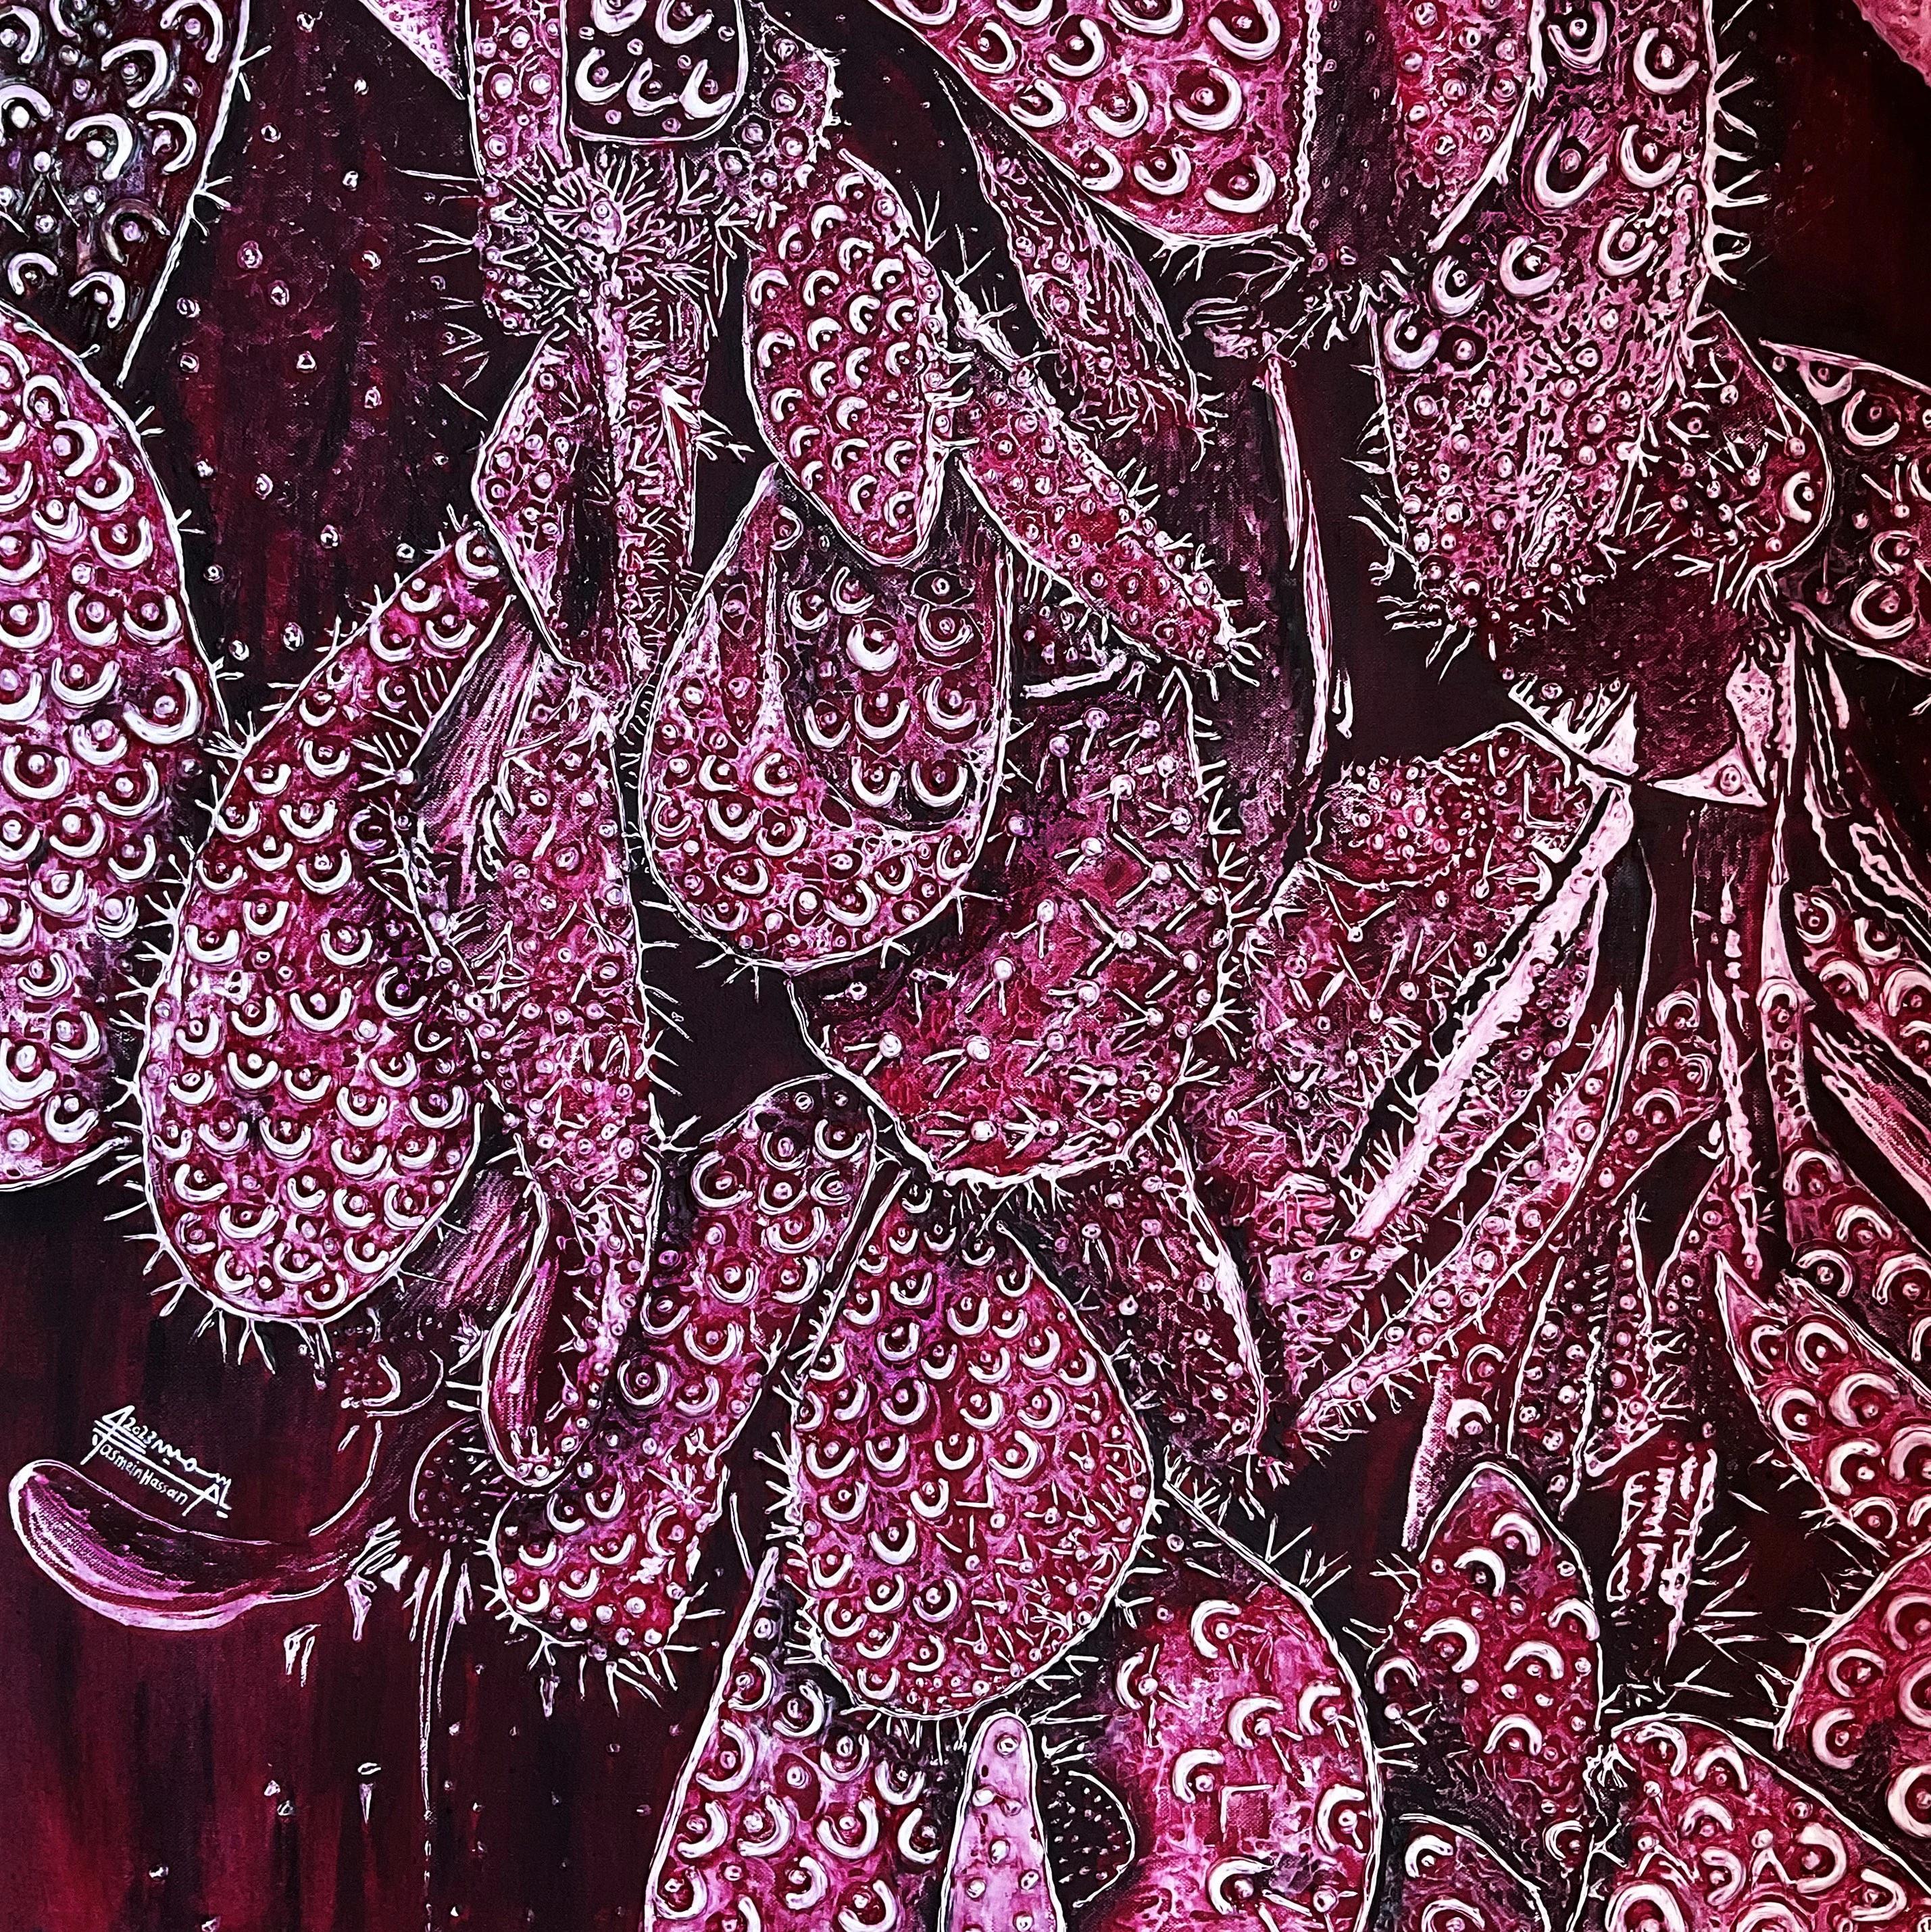 "Purple Prickly Pear" Abstract Painting 39" x 39" inch by YASMINE HASSAN